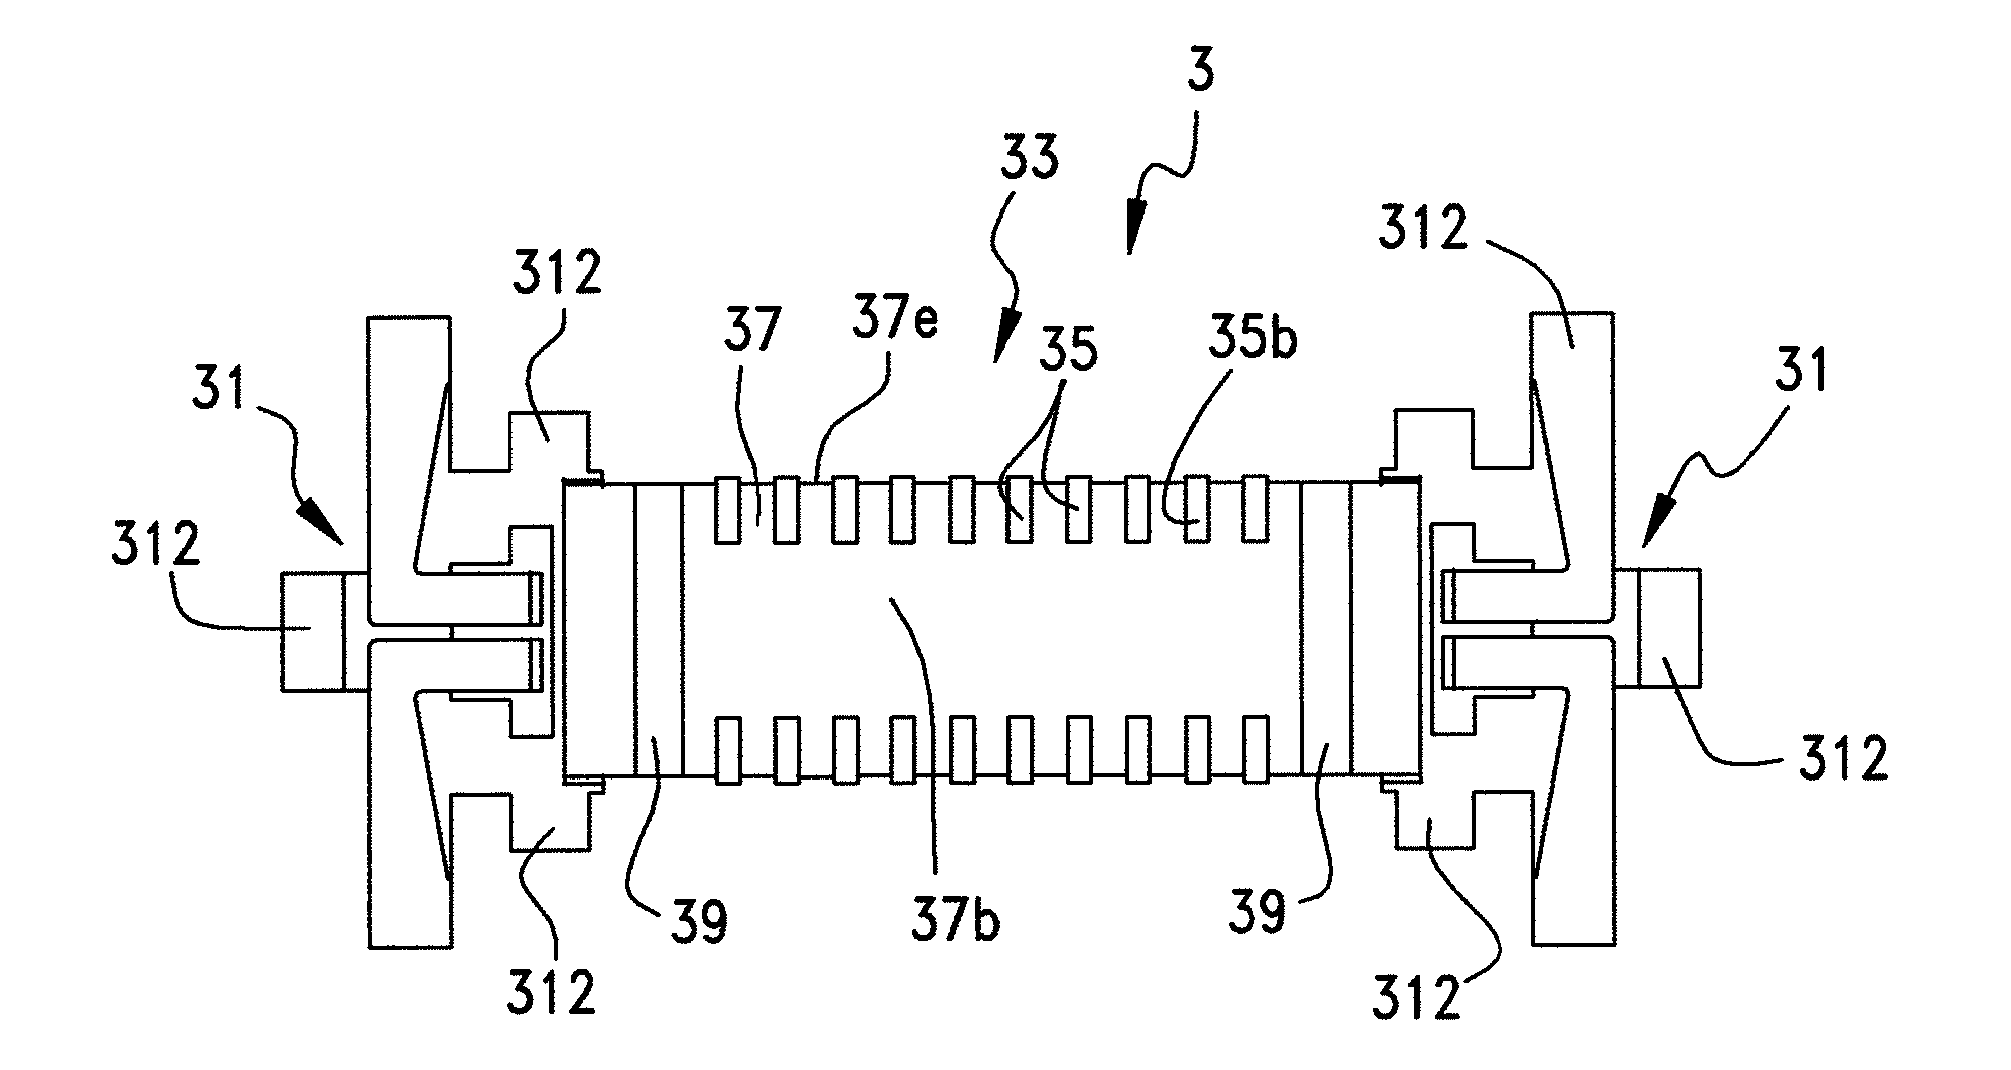 Elastic-cushioned capacitively-coupled connector